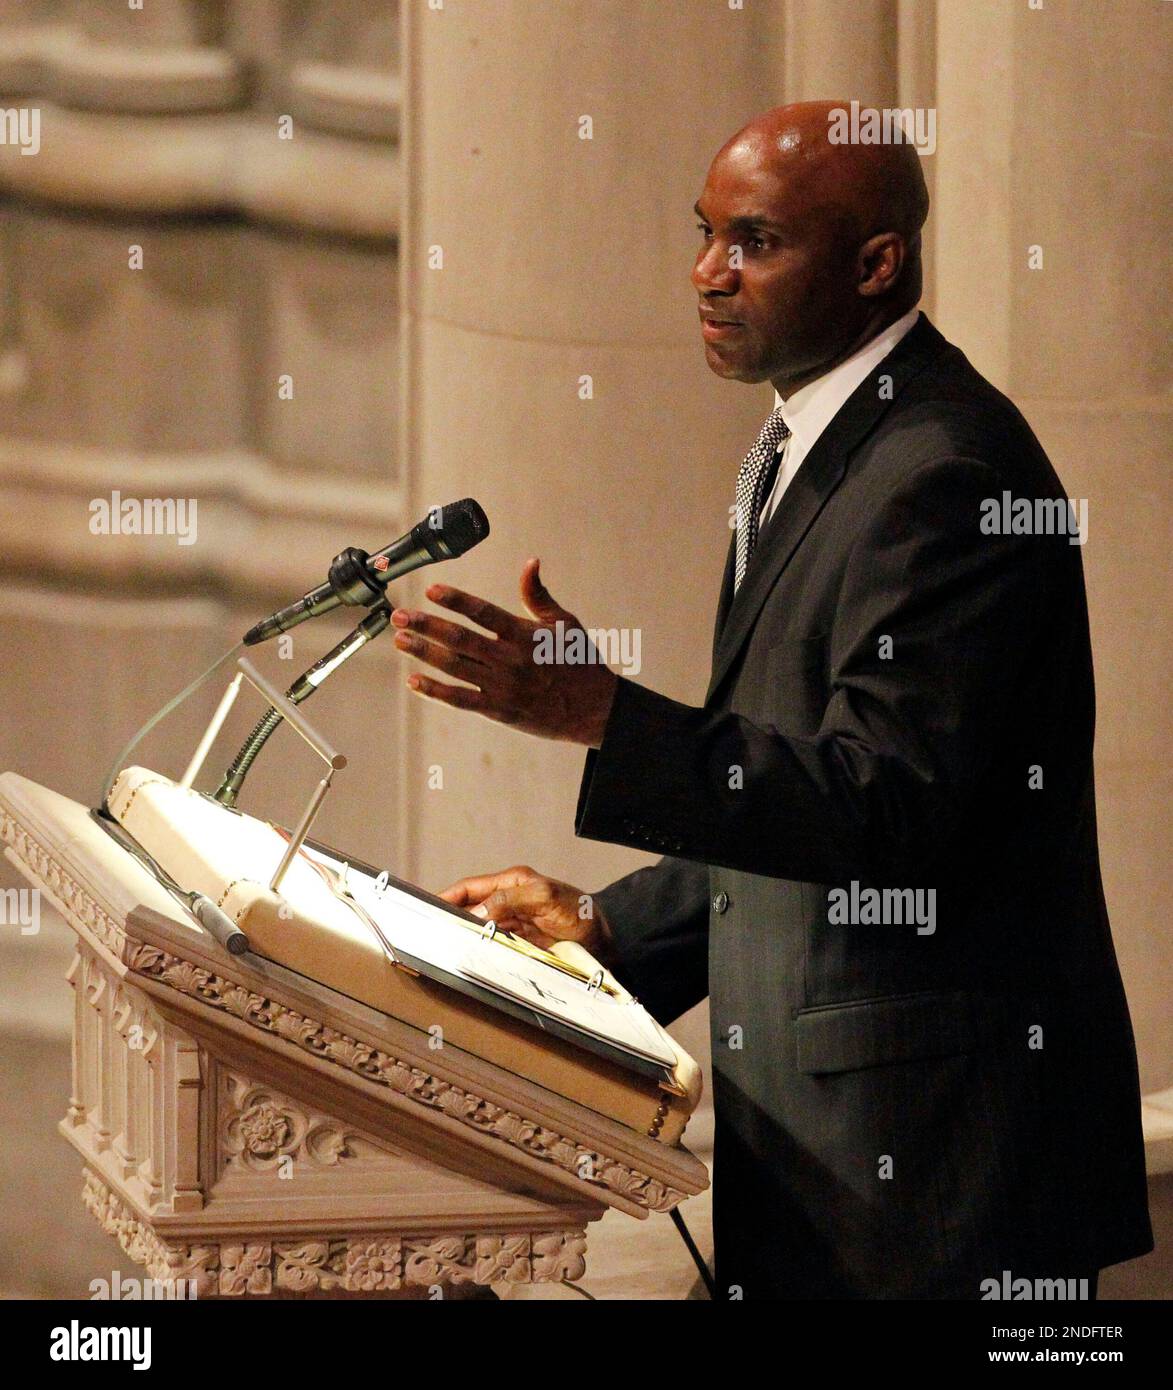 Rory Sparrow, vice president of player development for the NBA, speaks at  the funeral service for former NBA basketball player Manute Bol at  Washington National Cathedral in Washington, Tuesday, June 29, 2010. (